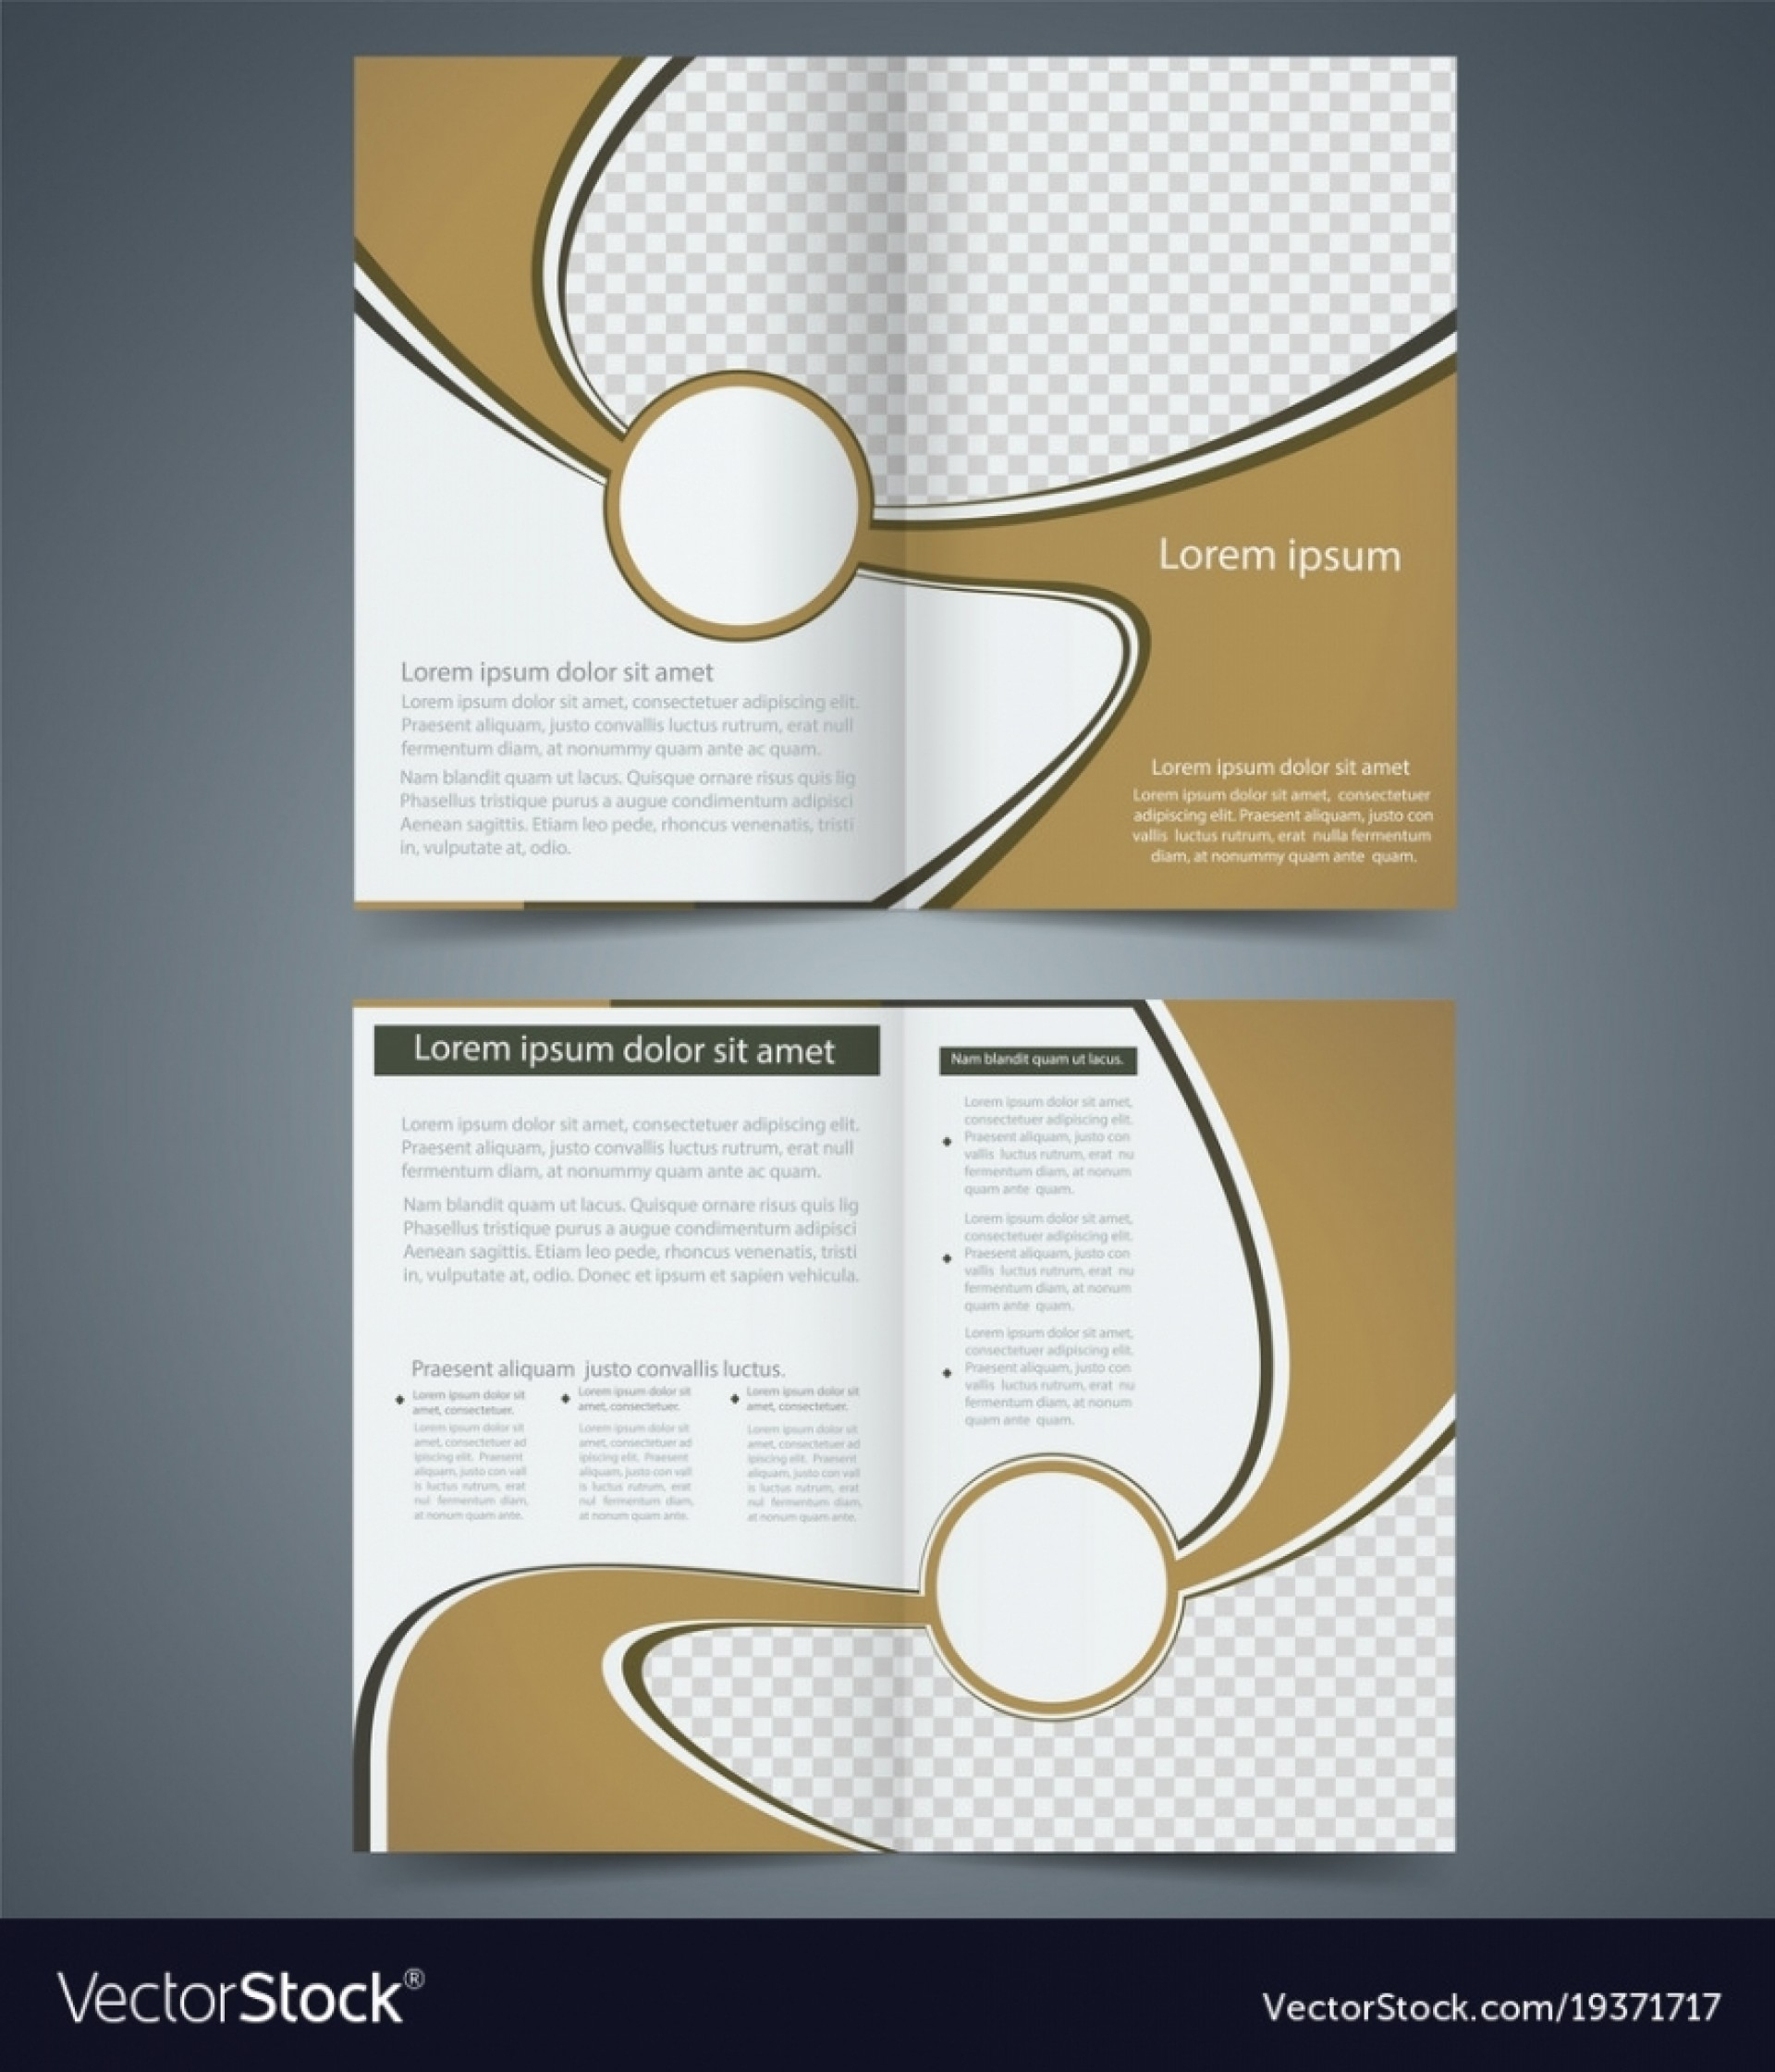 006 Ms Word Free Templates Brochure Template Stunning Ideas Intended For Free Template For Brochure Microsoft Office